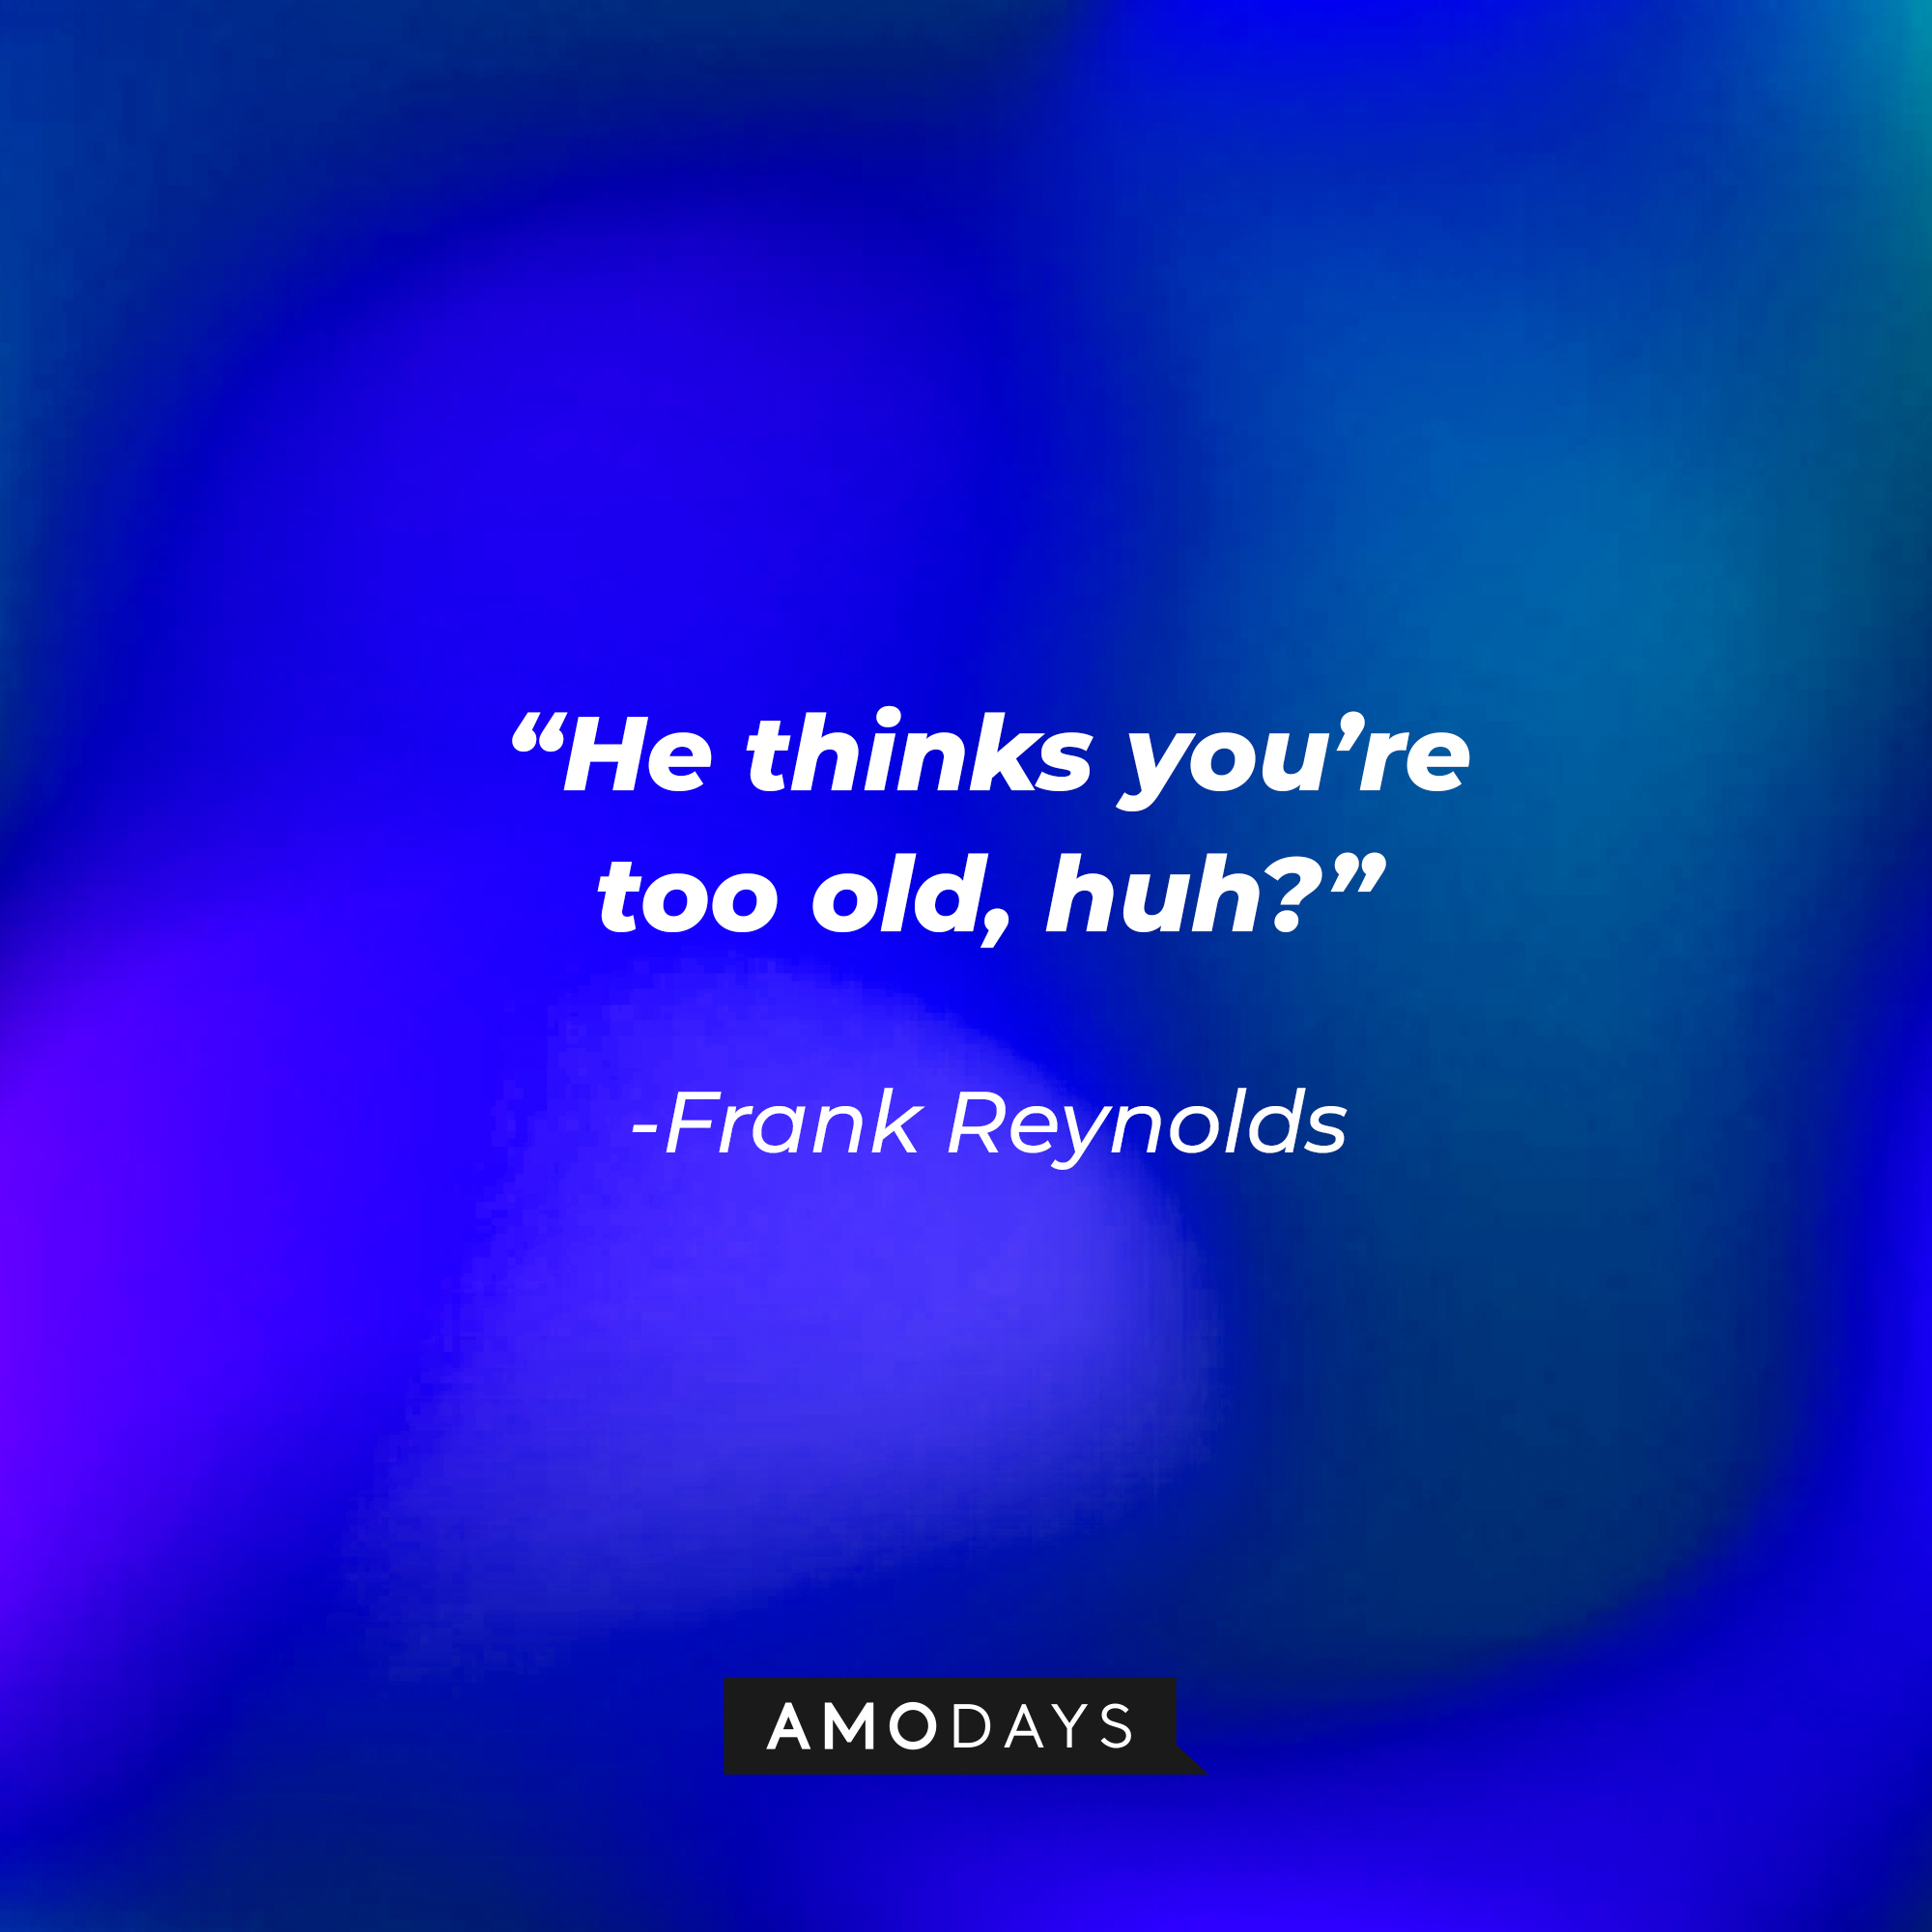 Frank Reynolds quote: “He thinks you’re too old, huh?” | Source: facebook.com/alwayssunny